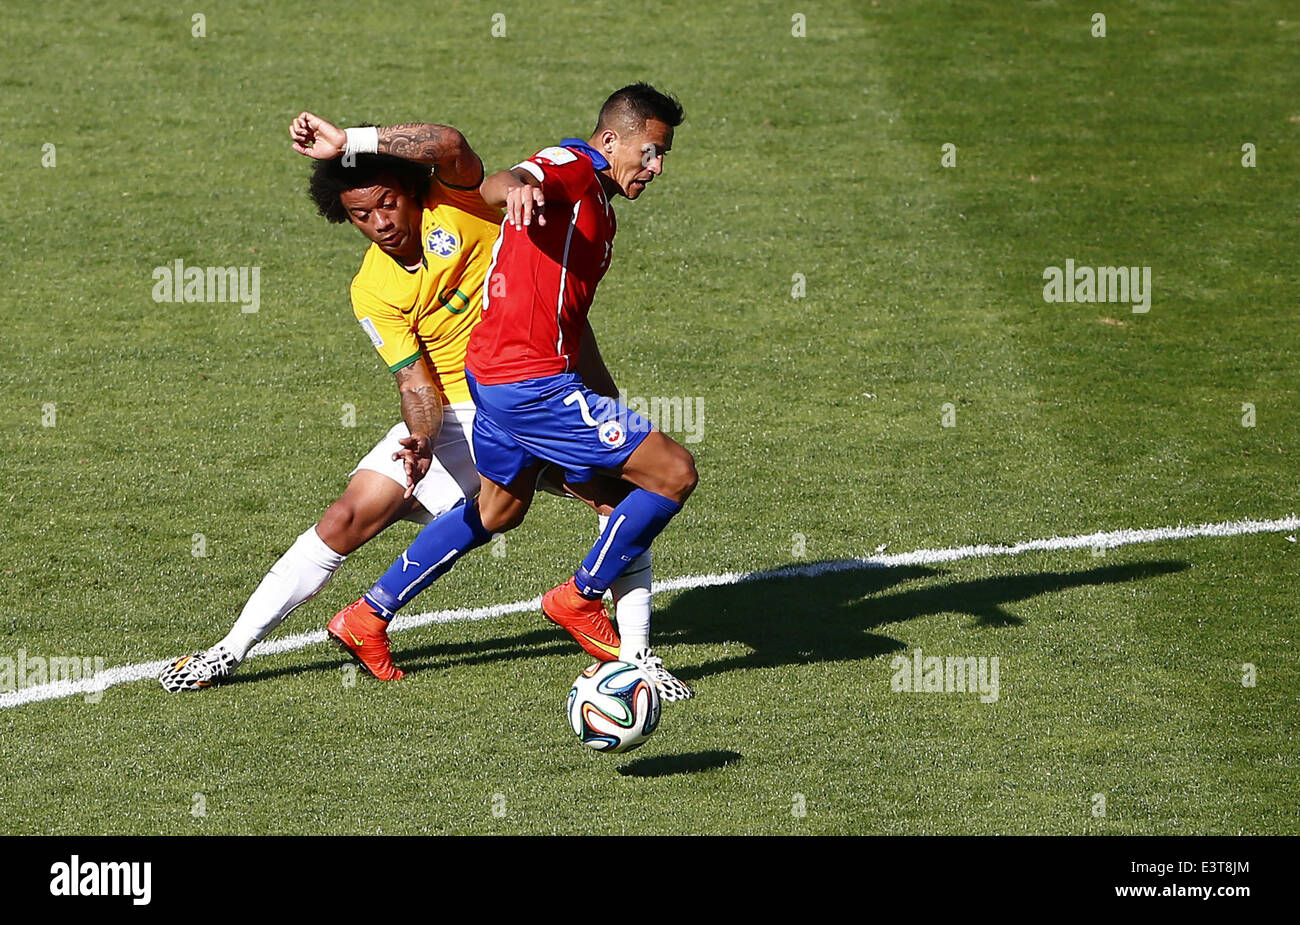 Belo Horizonte, Brazil. 28th June, 2014. Brazil's Marcelo (L) vies with Chile's Alexis Sanchez during a Round of 16 match between Brazil and Chile of 2014 FIFA World Cup at the Estadio Mineirao Stadium in Belo Horizonte, Brazil, on June 28, 2014. Credit:  Liu Bin/Xinhua/Alamy Live News Stock Photo